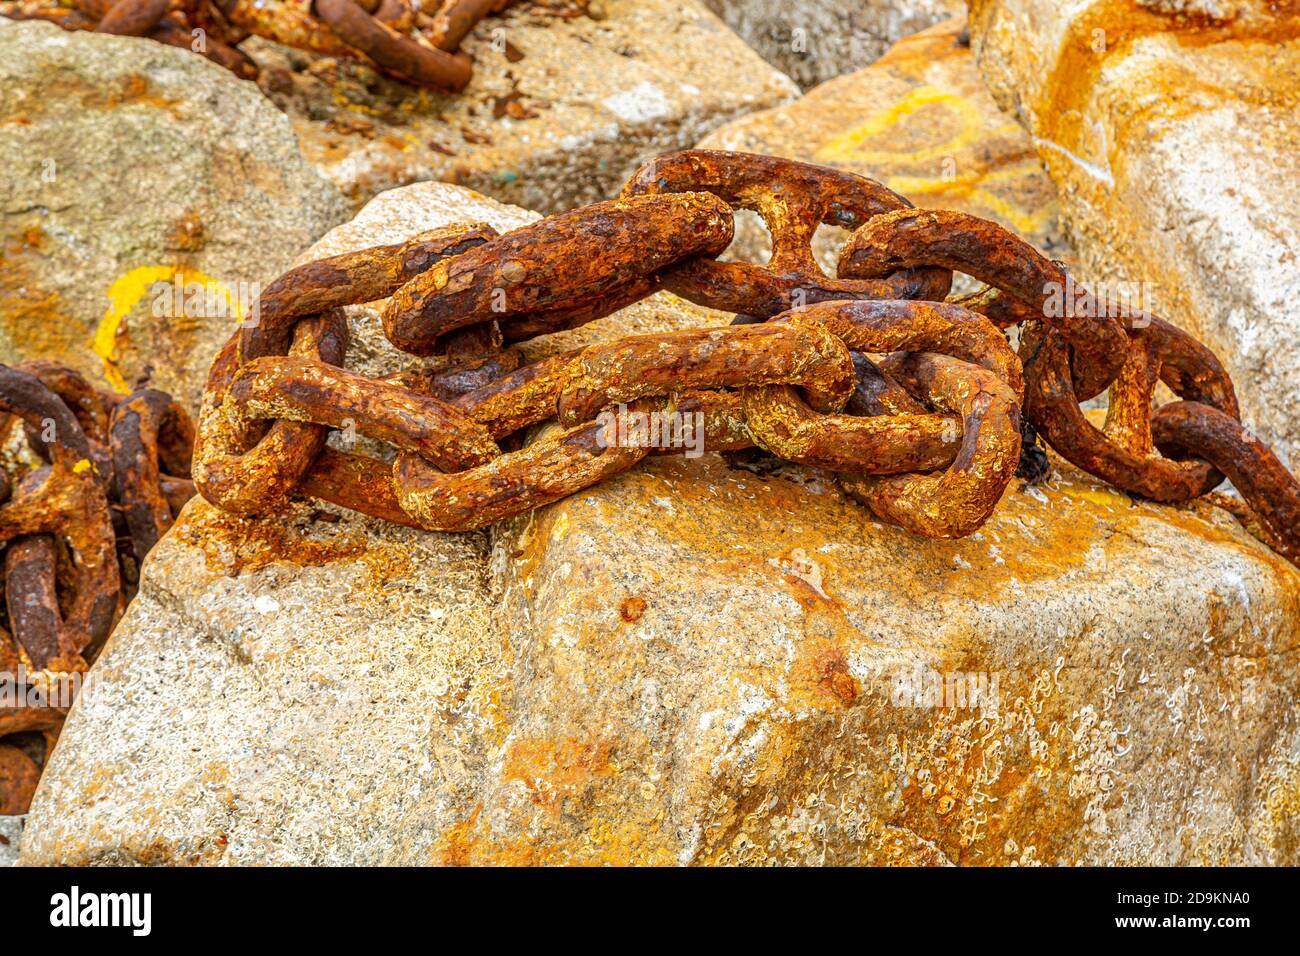 Old rusty anchor chain on a rock. Stock Photo